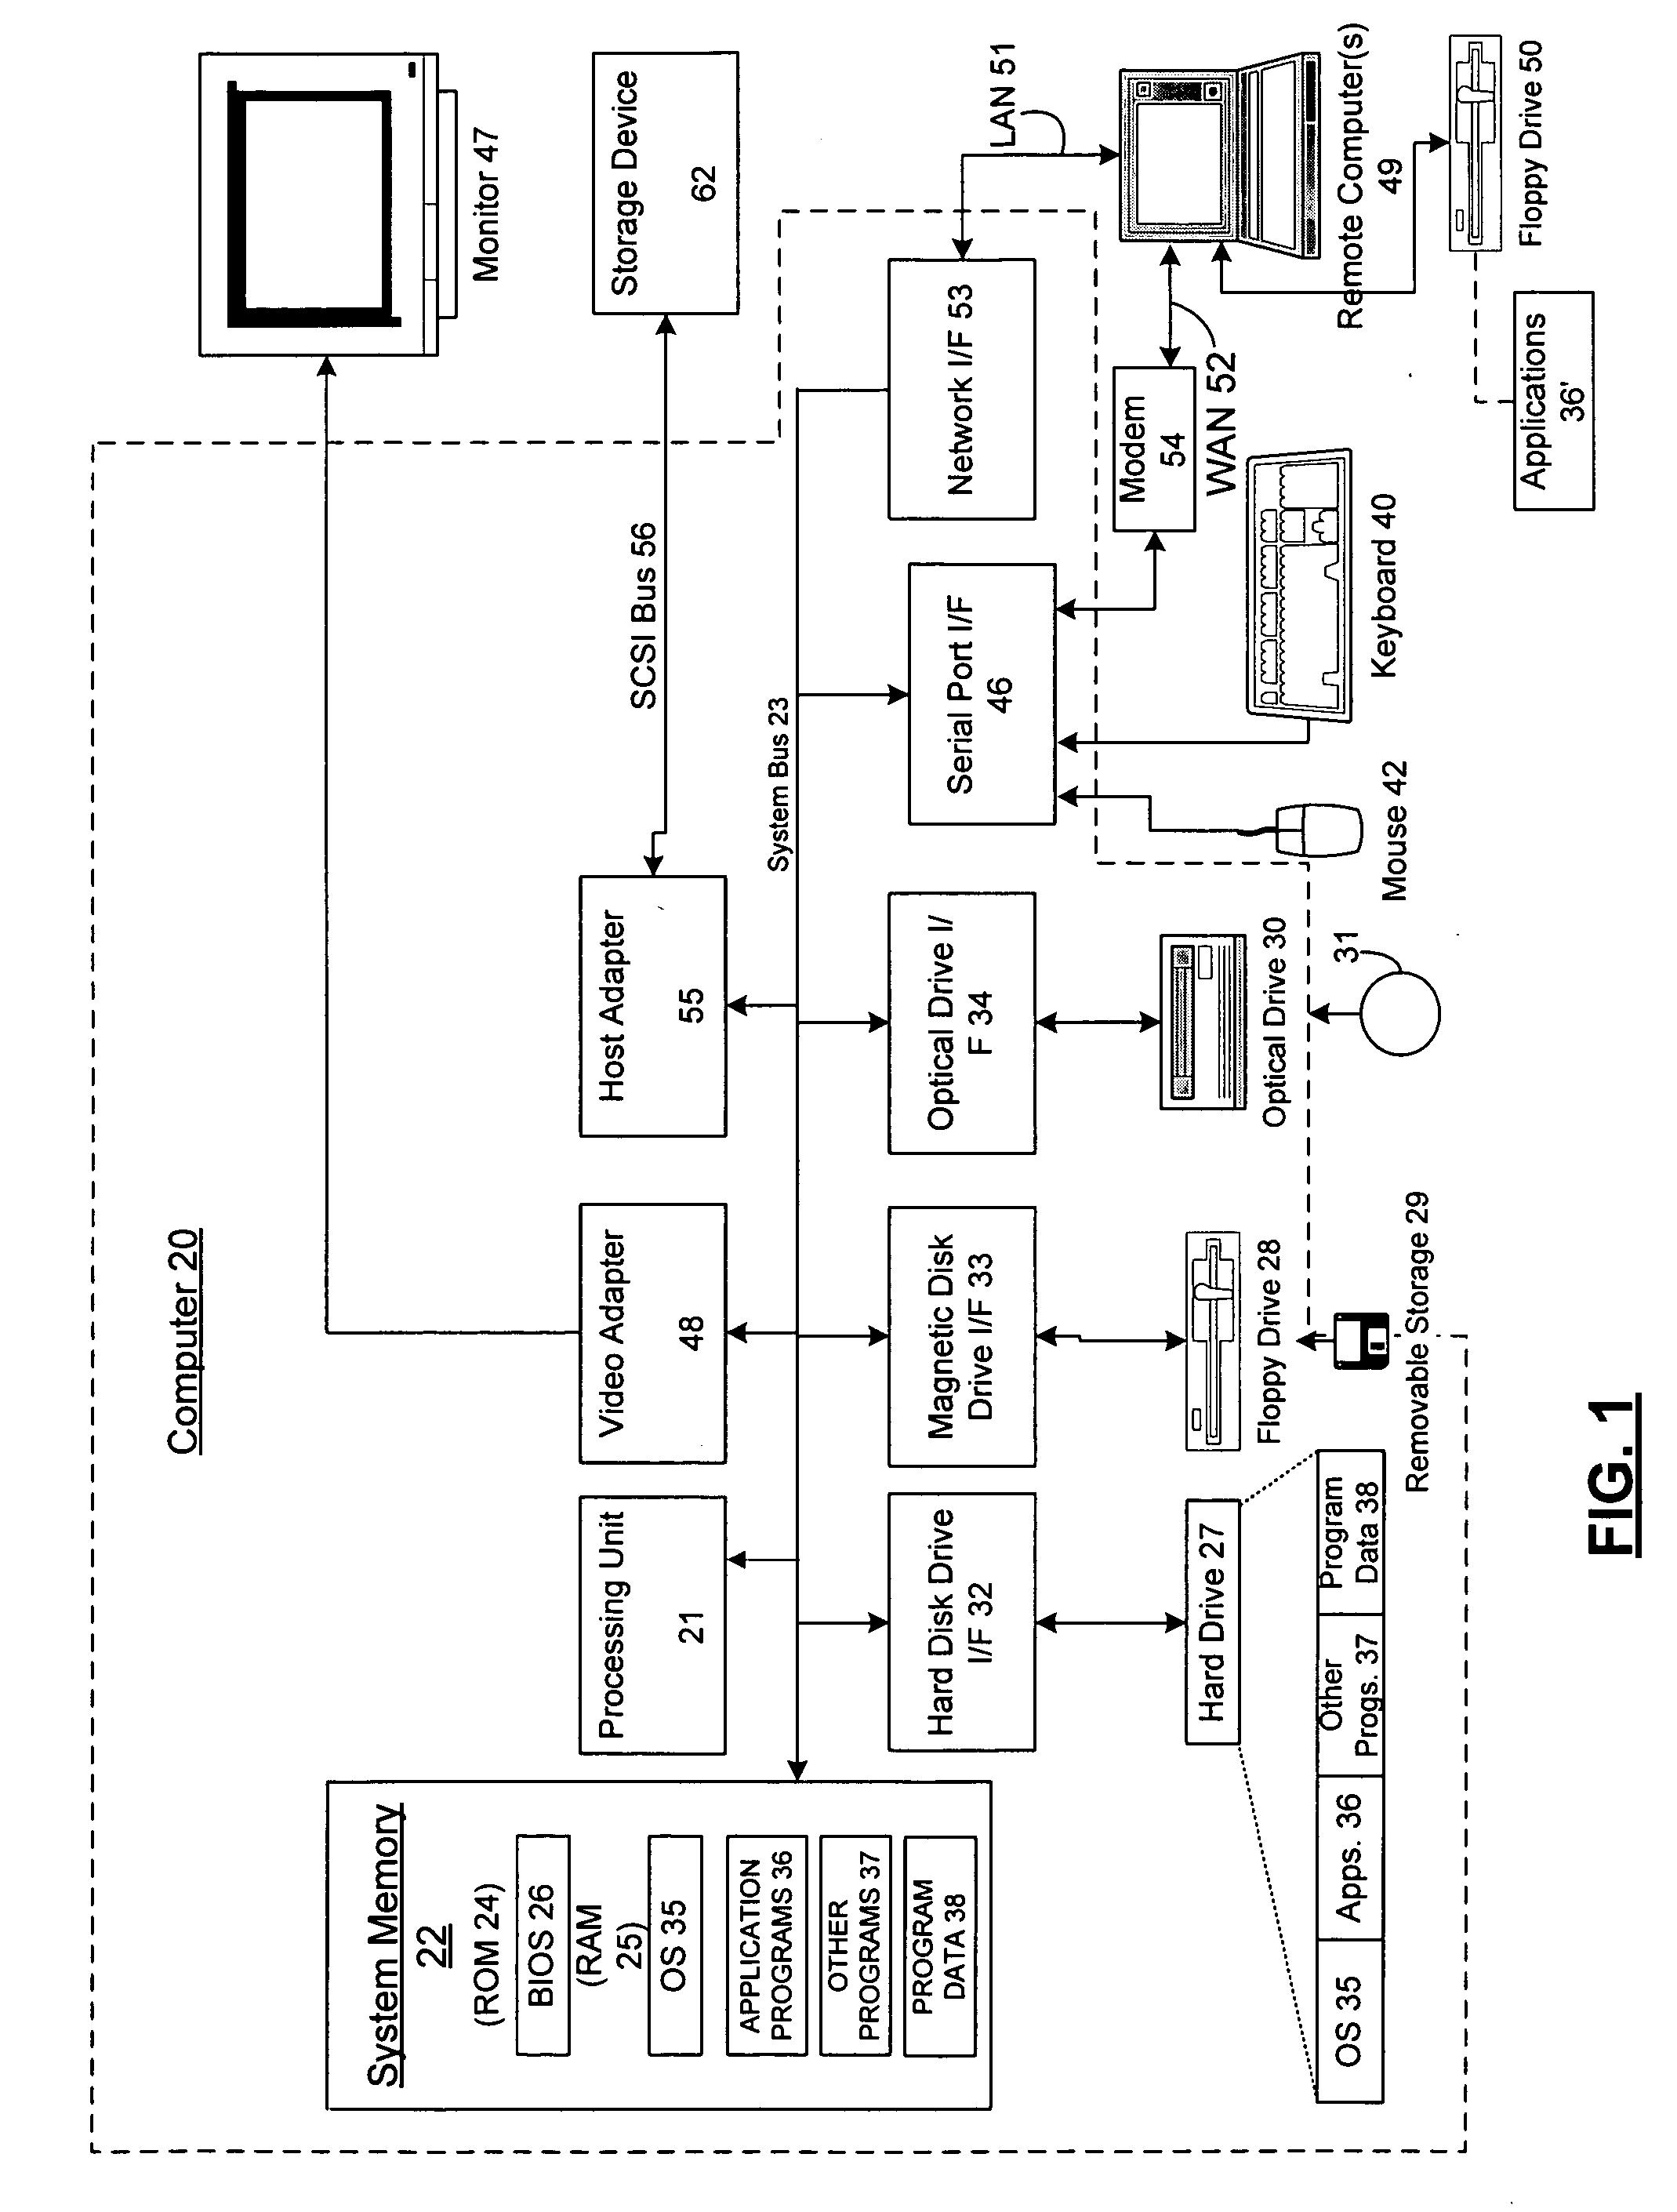 Systems and methods for reconciling image metadata